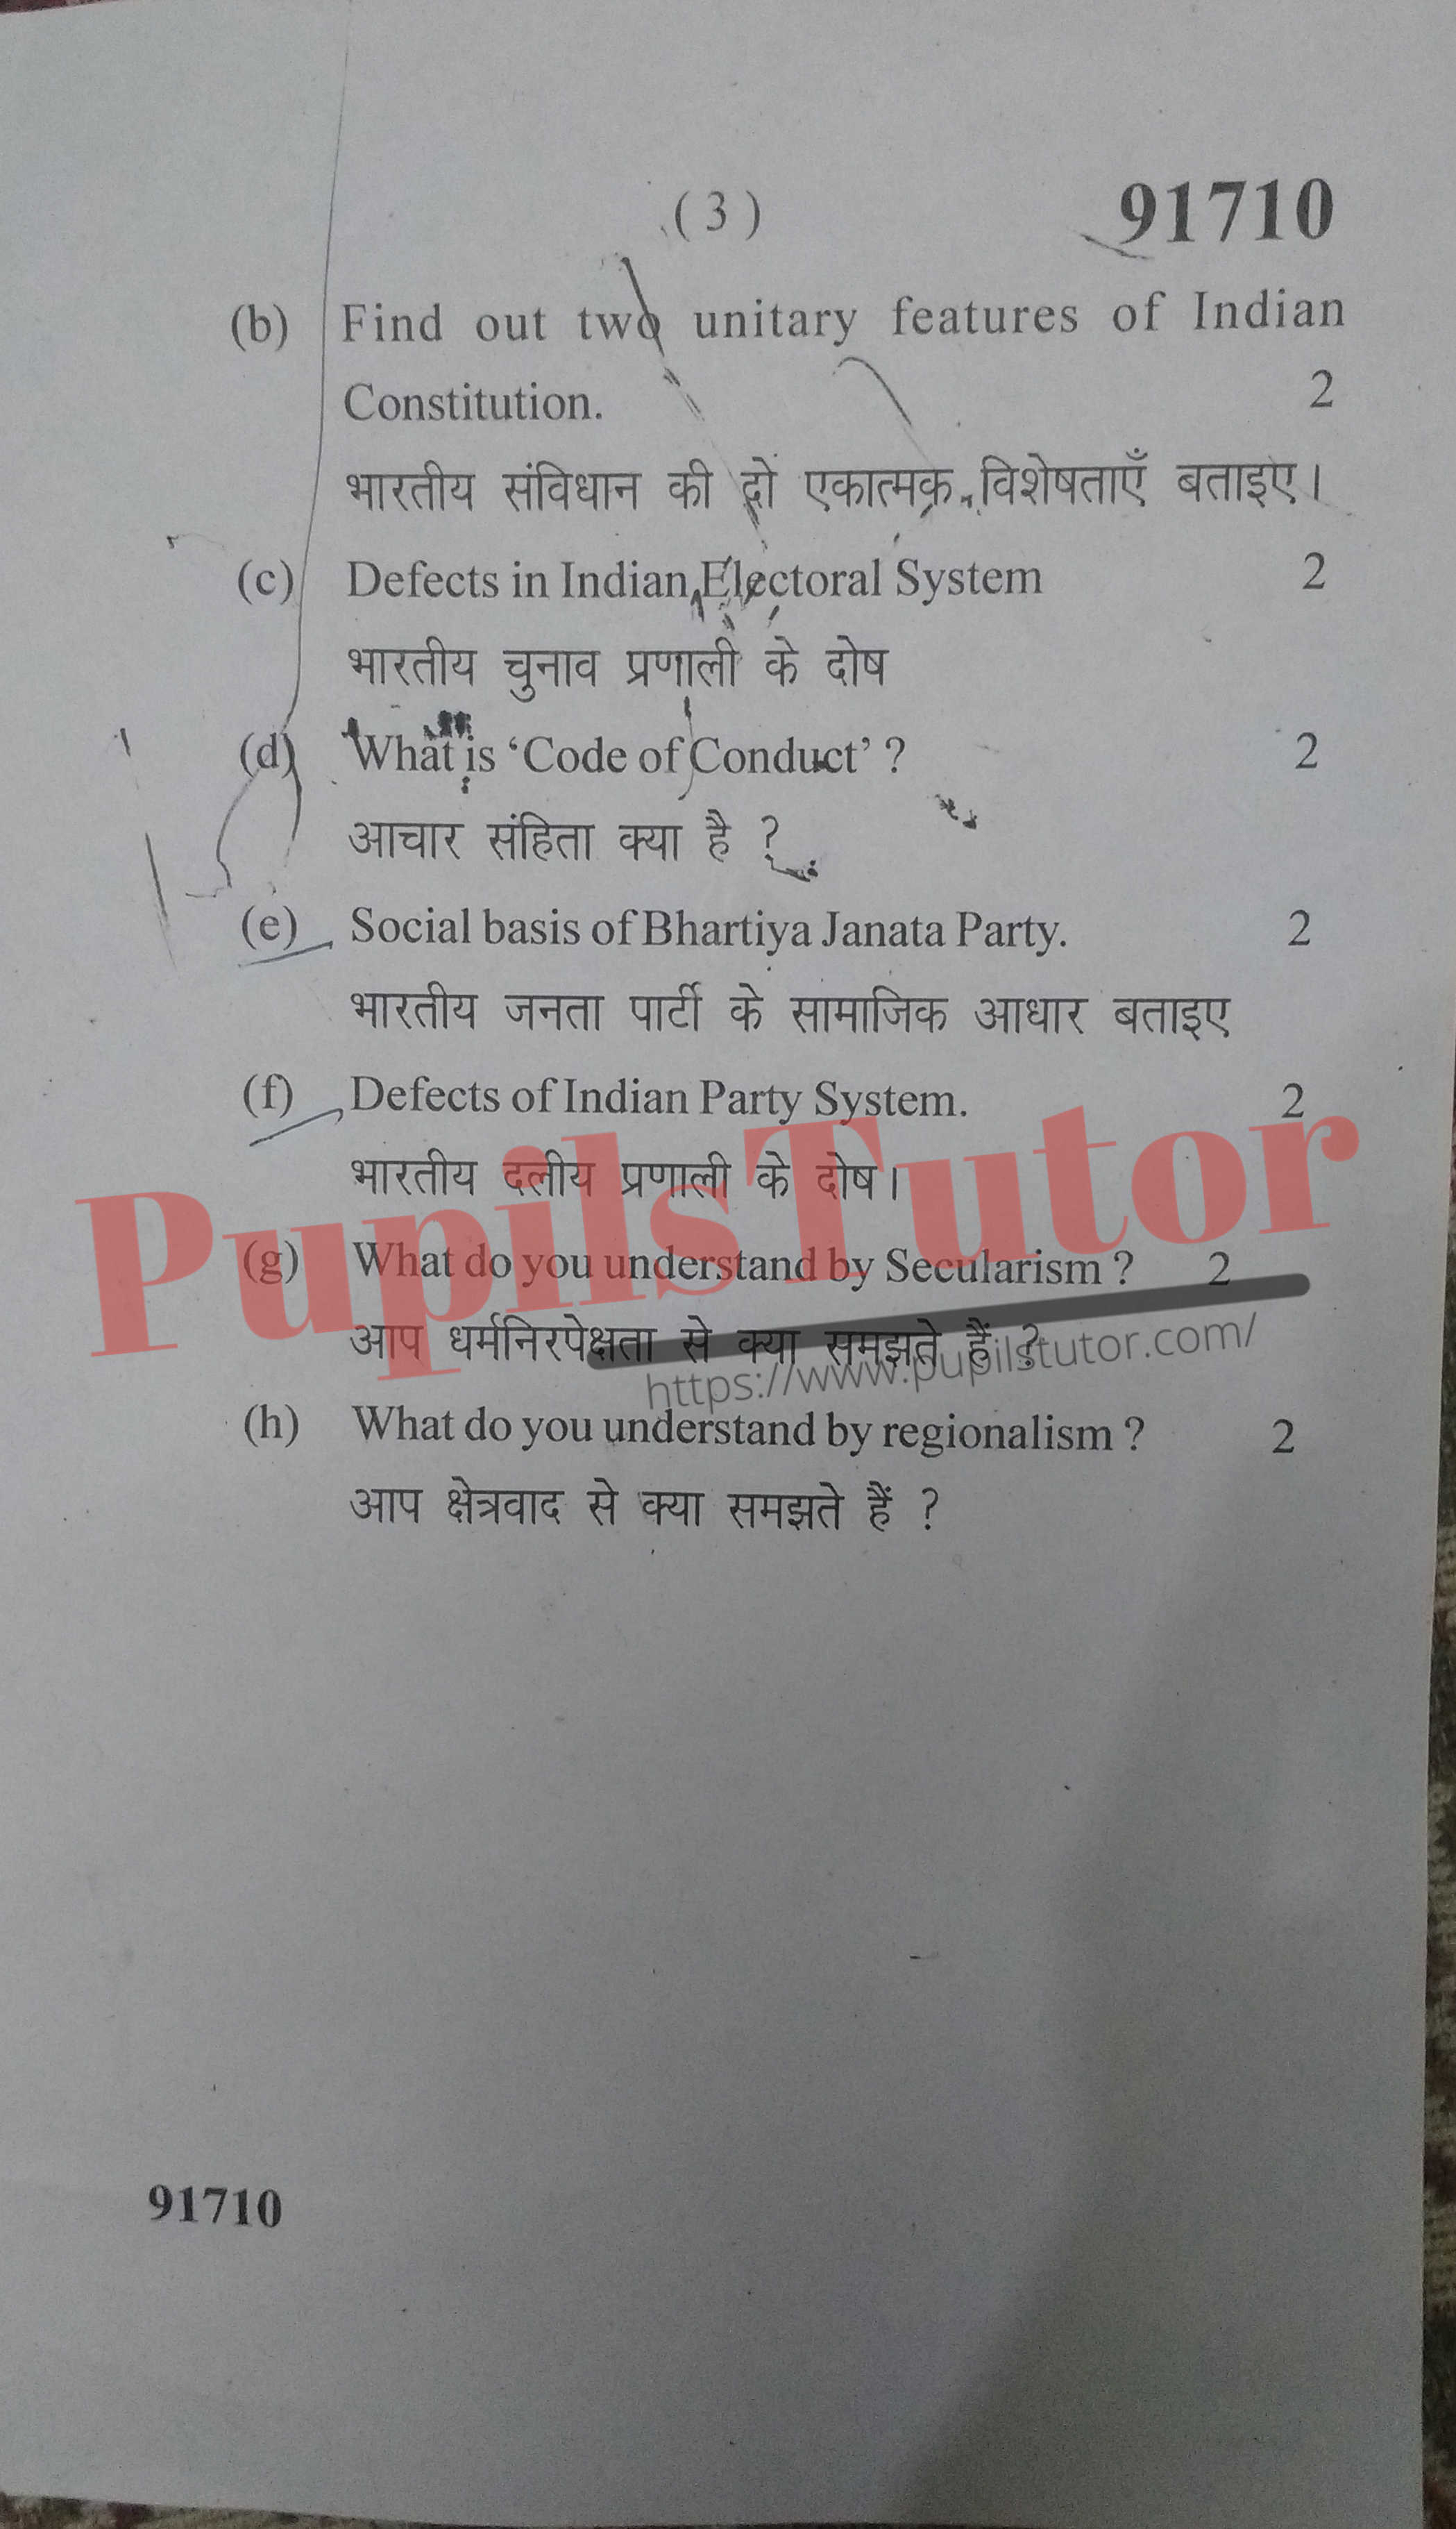 Free Download PDF Of M.D. University B.A. Second Semester Latest Question Paper For Political Science Subject (Page 3) - https://www.pupilstutor.com